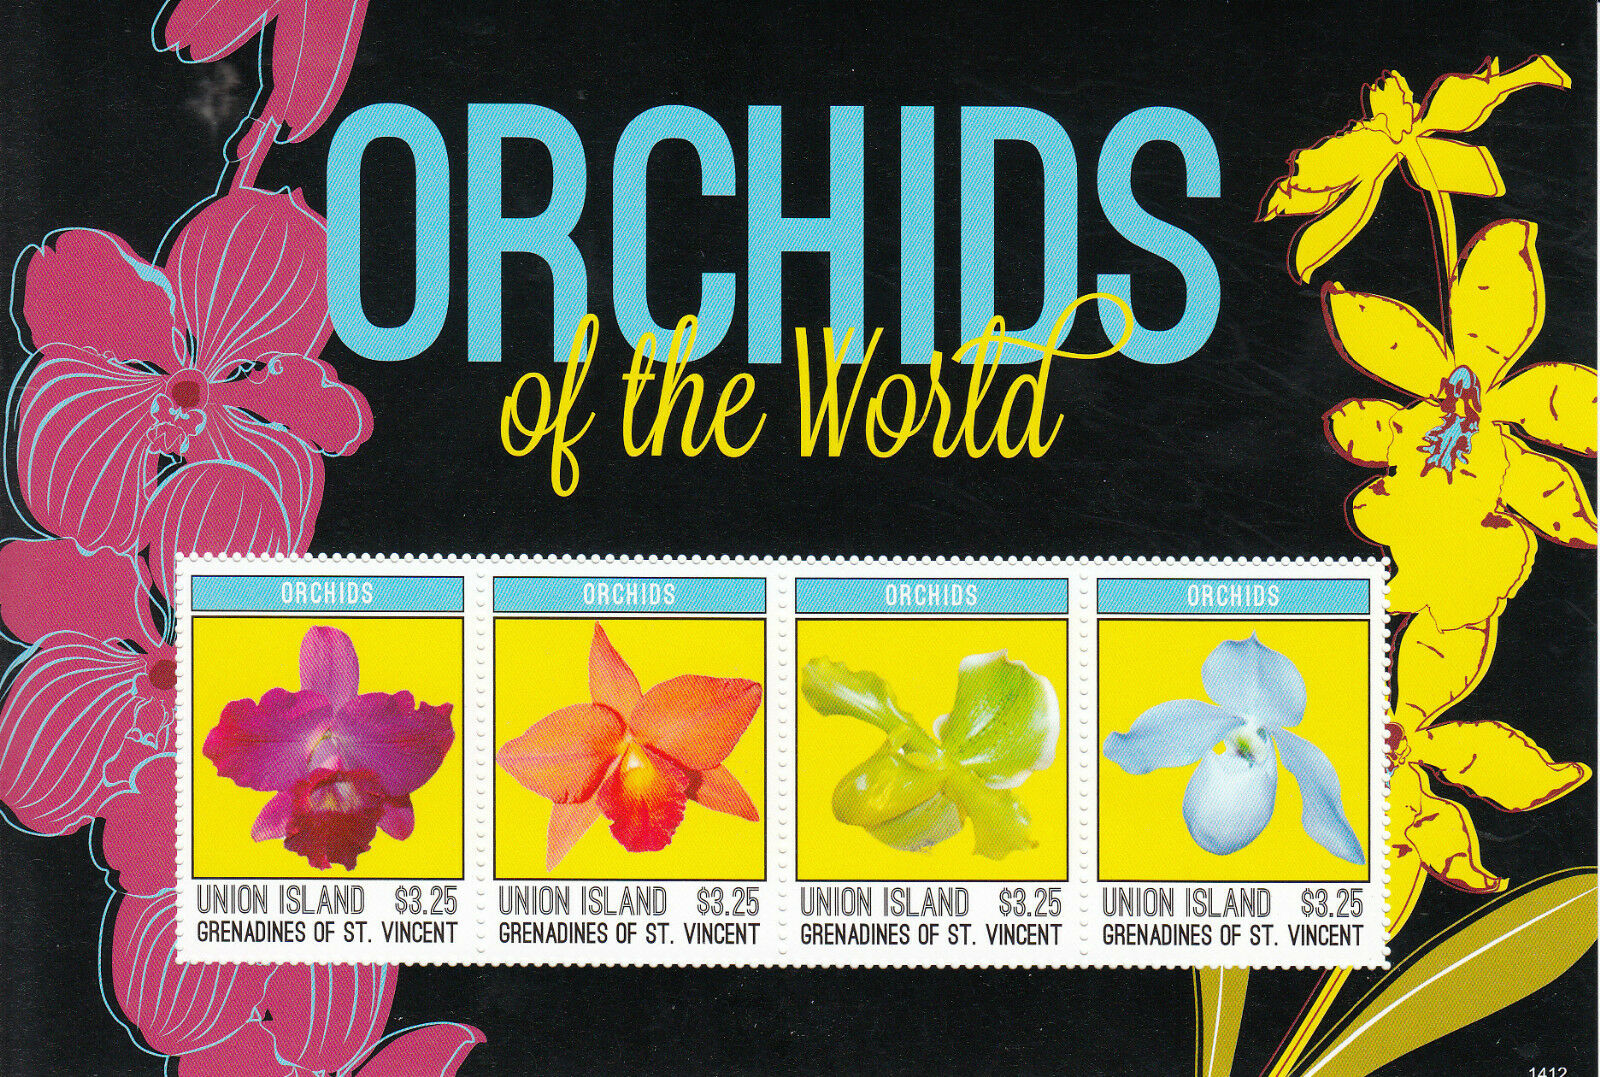 Union Island Grenadines St Vincent 2014 MNH Orchids of World 4v M/S Flowers